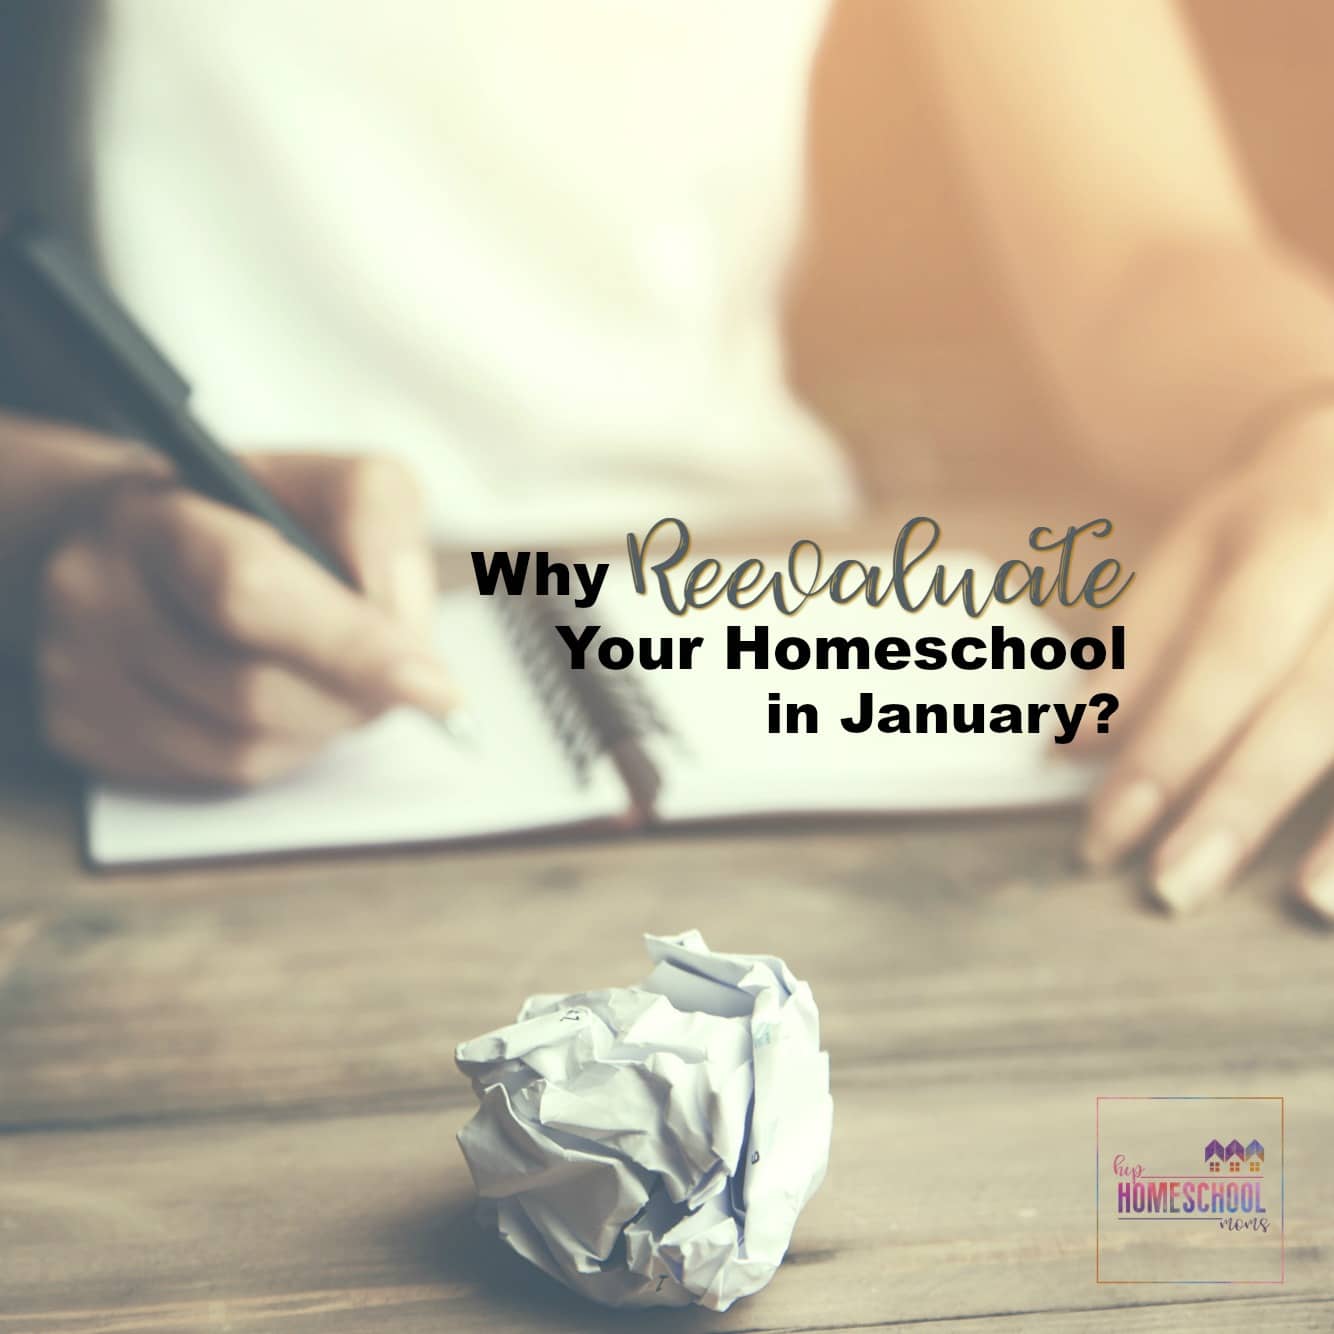 Why Reevaluate Your Homeschool in January?